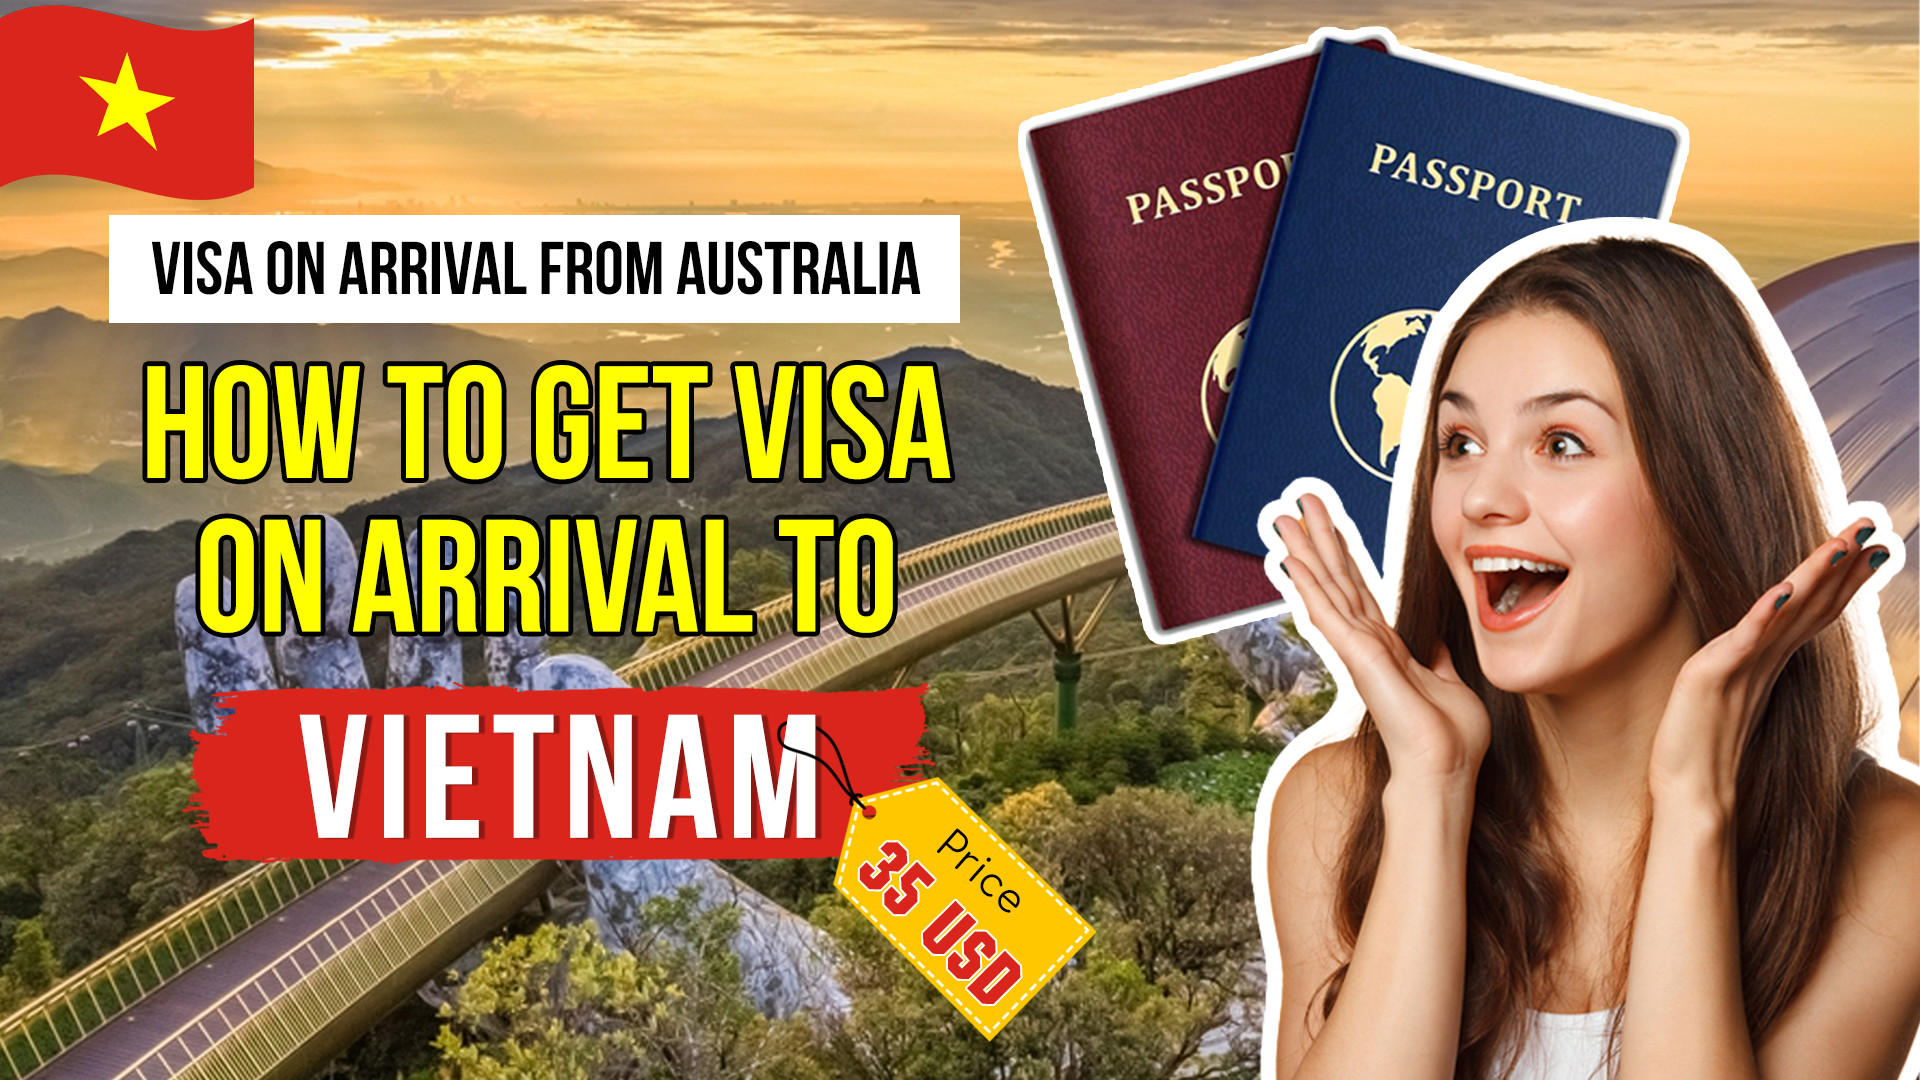 3 Tips to apply for a Vietnam visa successfully